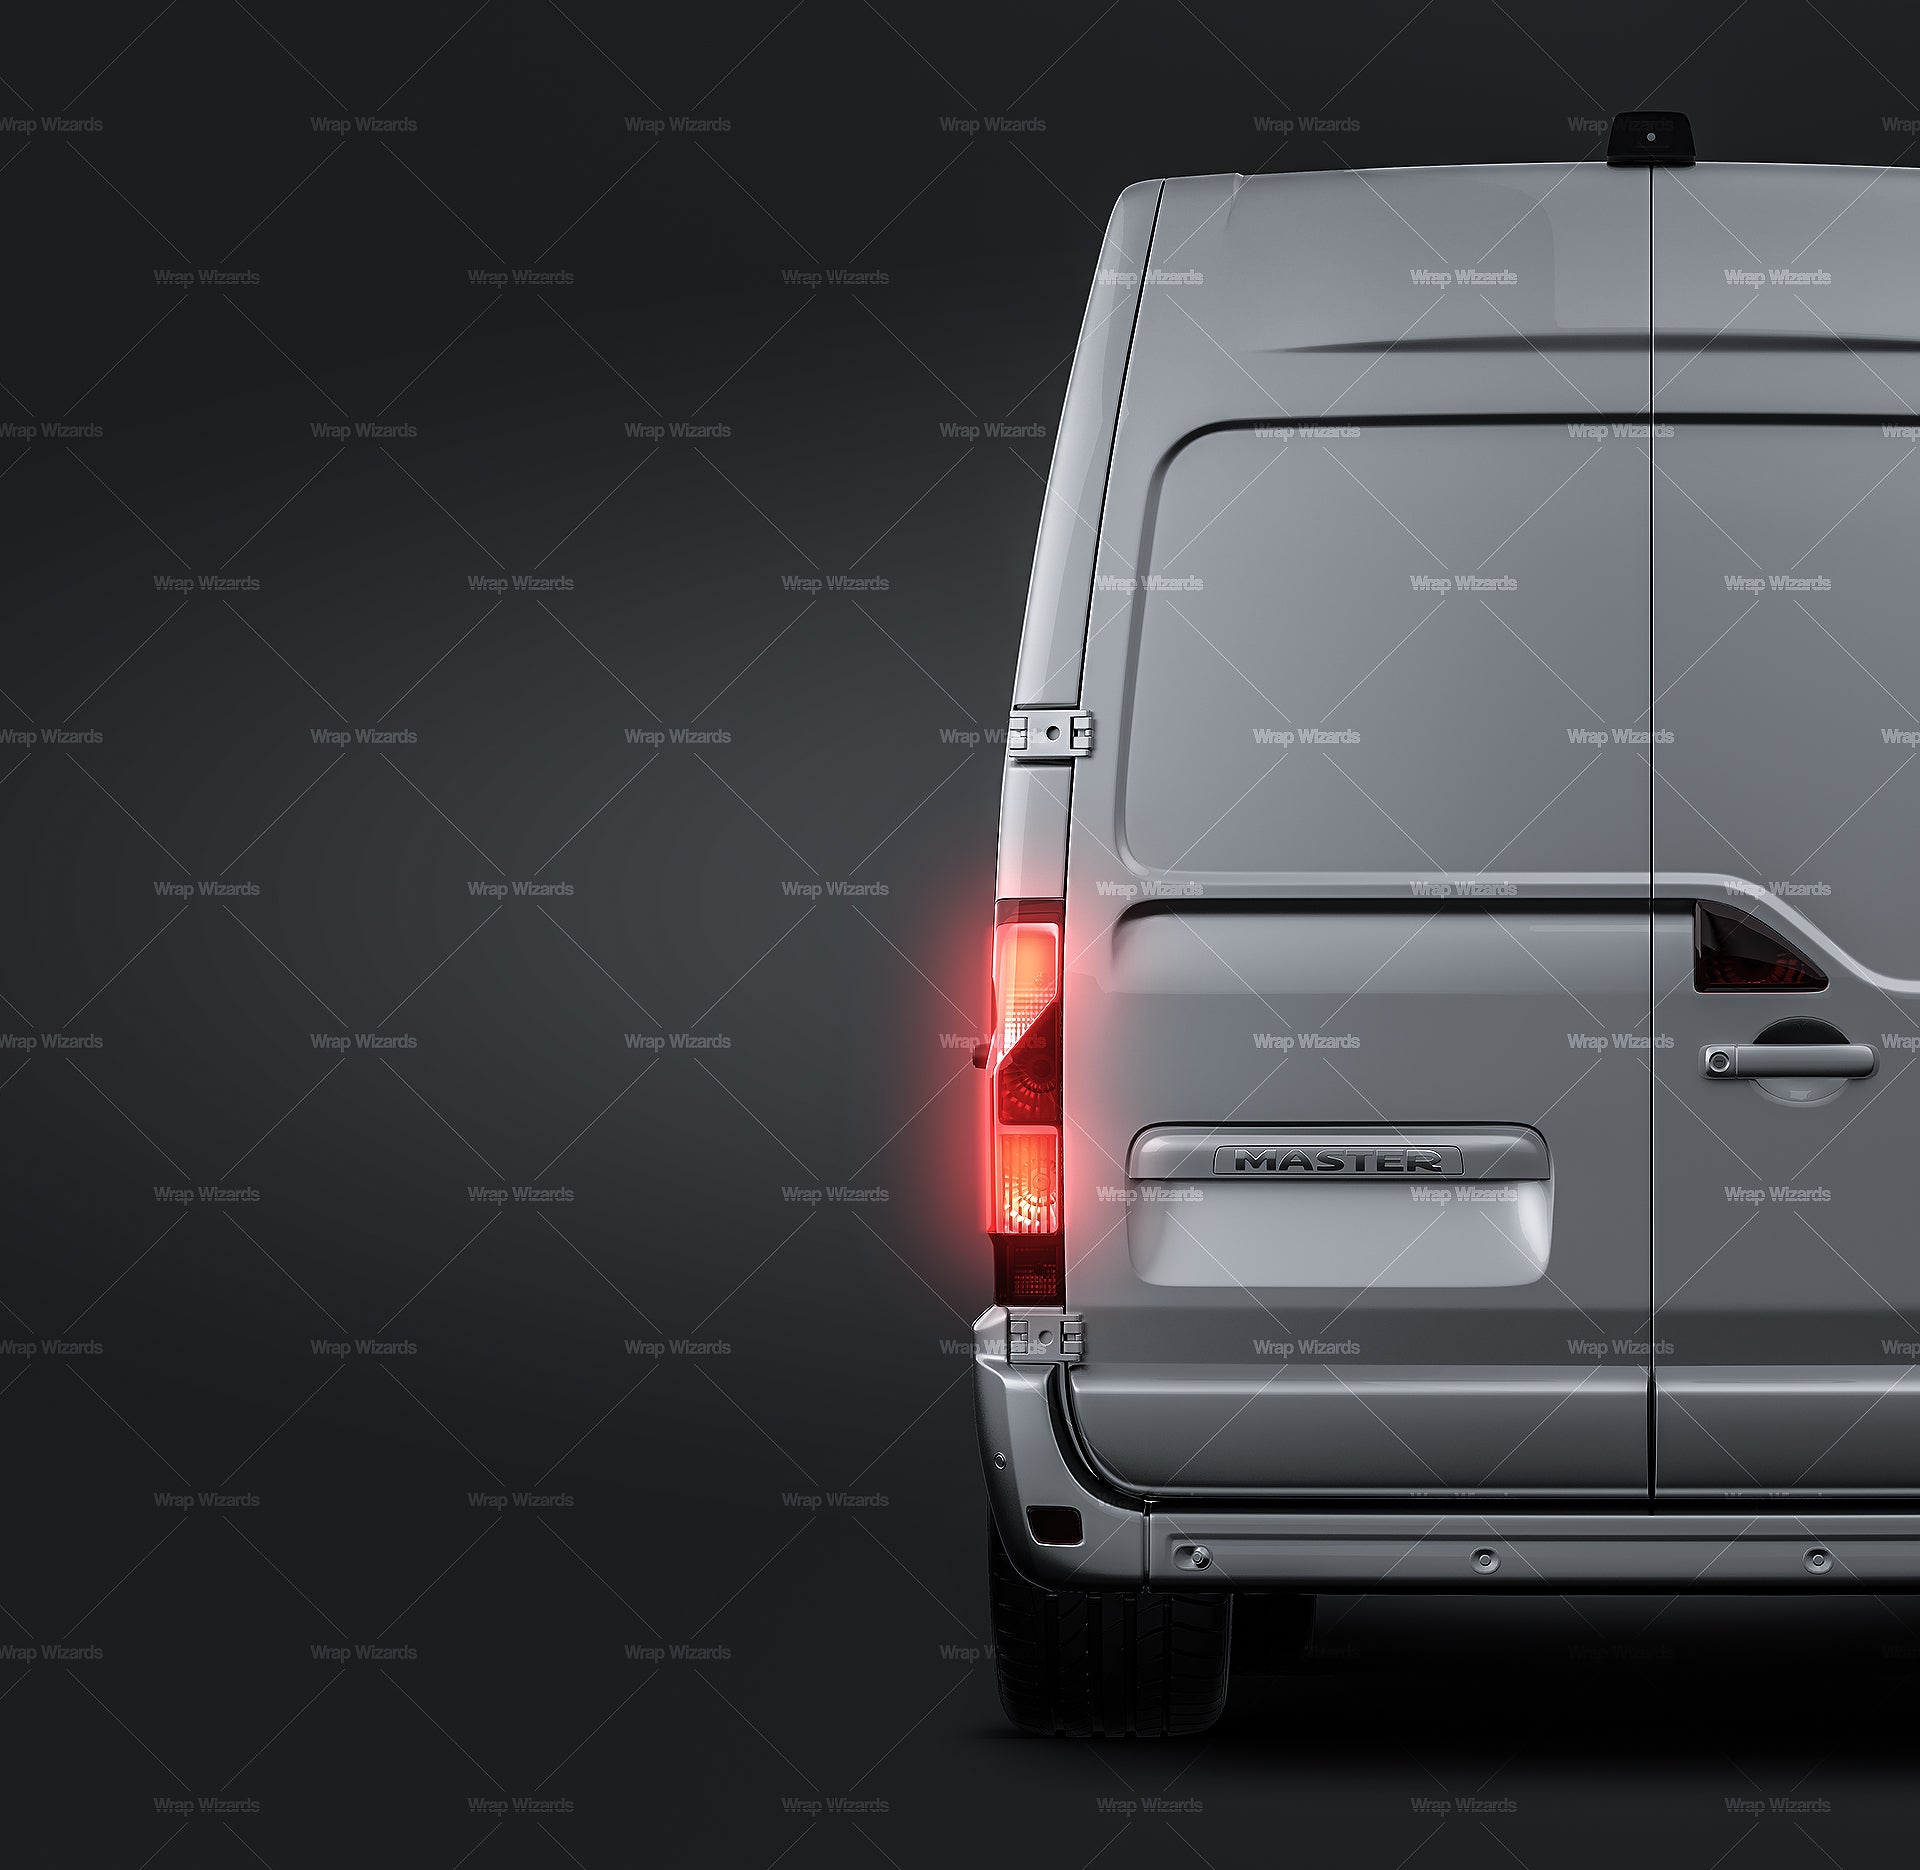 Renault Master L2H2 glossy finish - all sides Car Mockup Template.psd